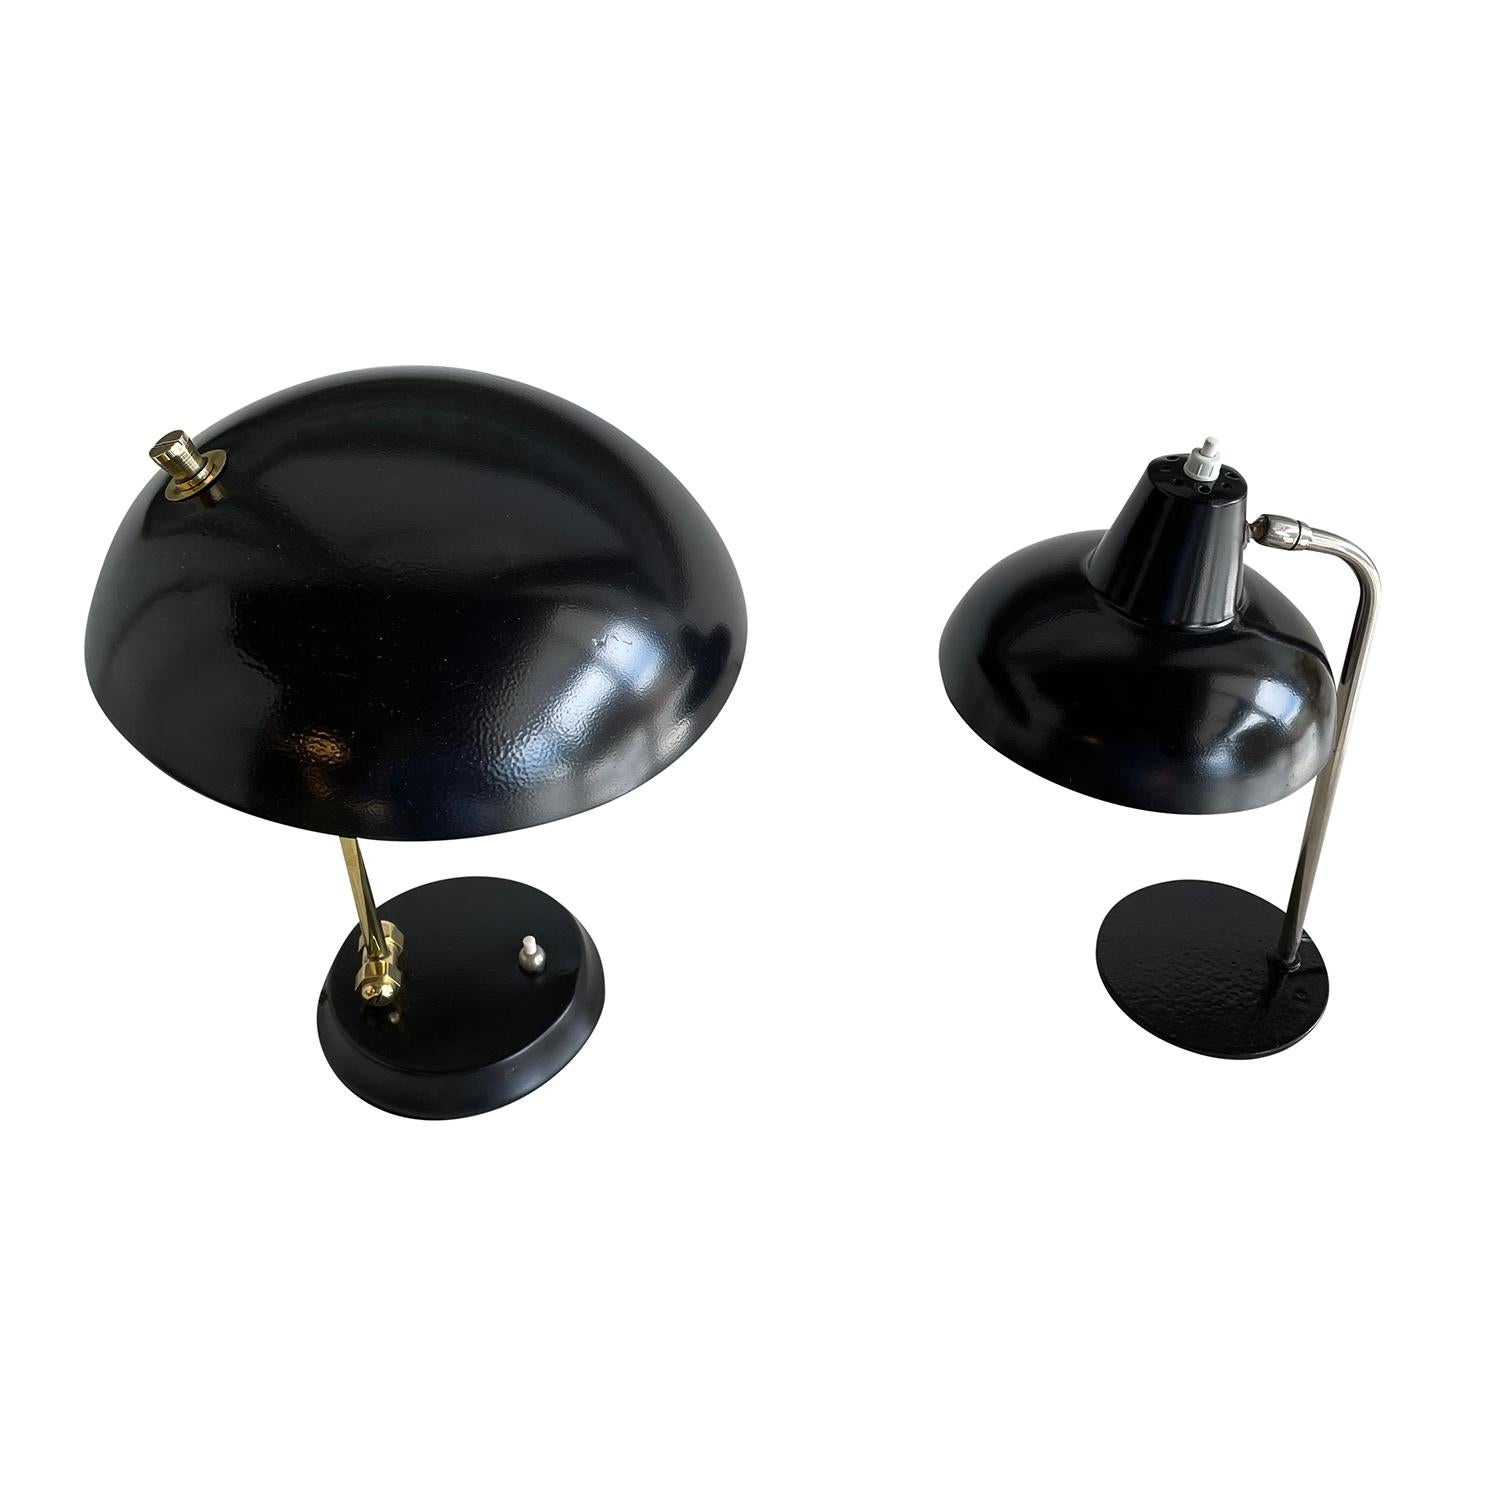 A black, vintage Mid-Century Modern Italian pair of similar table lamps made of hand crafted painted metal, in good condition. The neck of the smaller desk light is made of hand crafted steel, supported by a round metal base and the larger one is